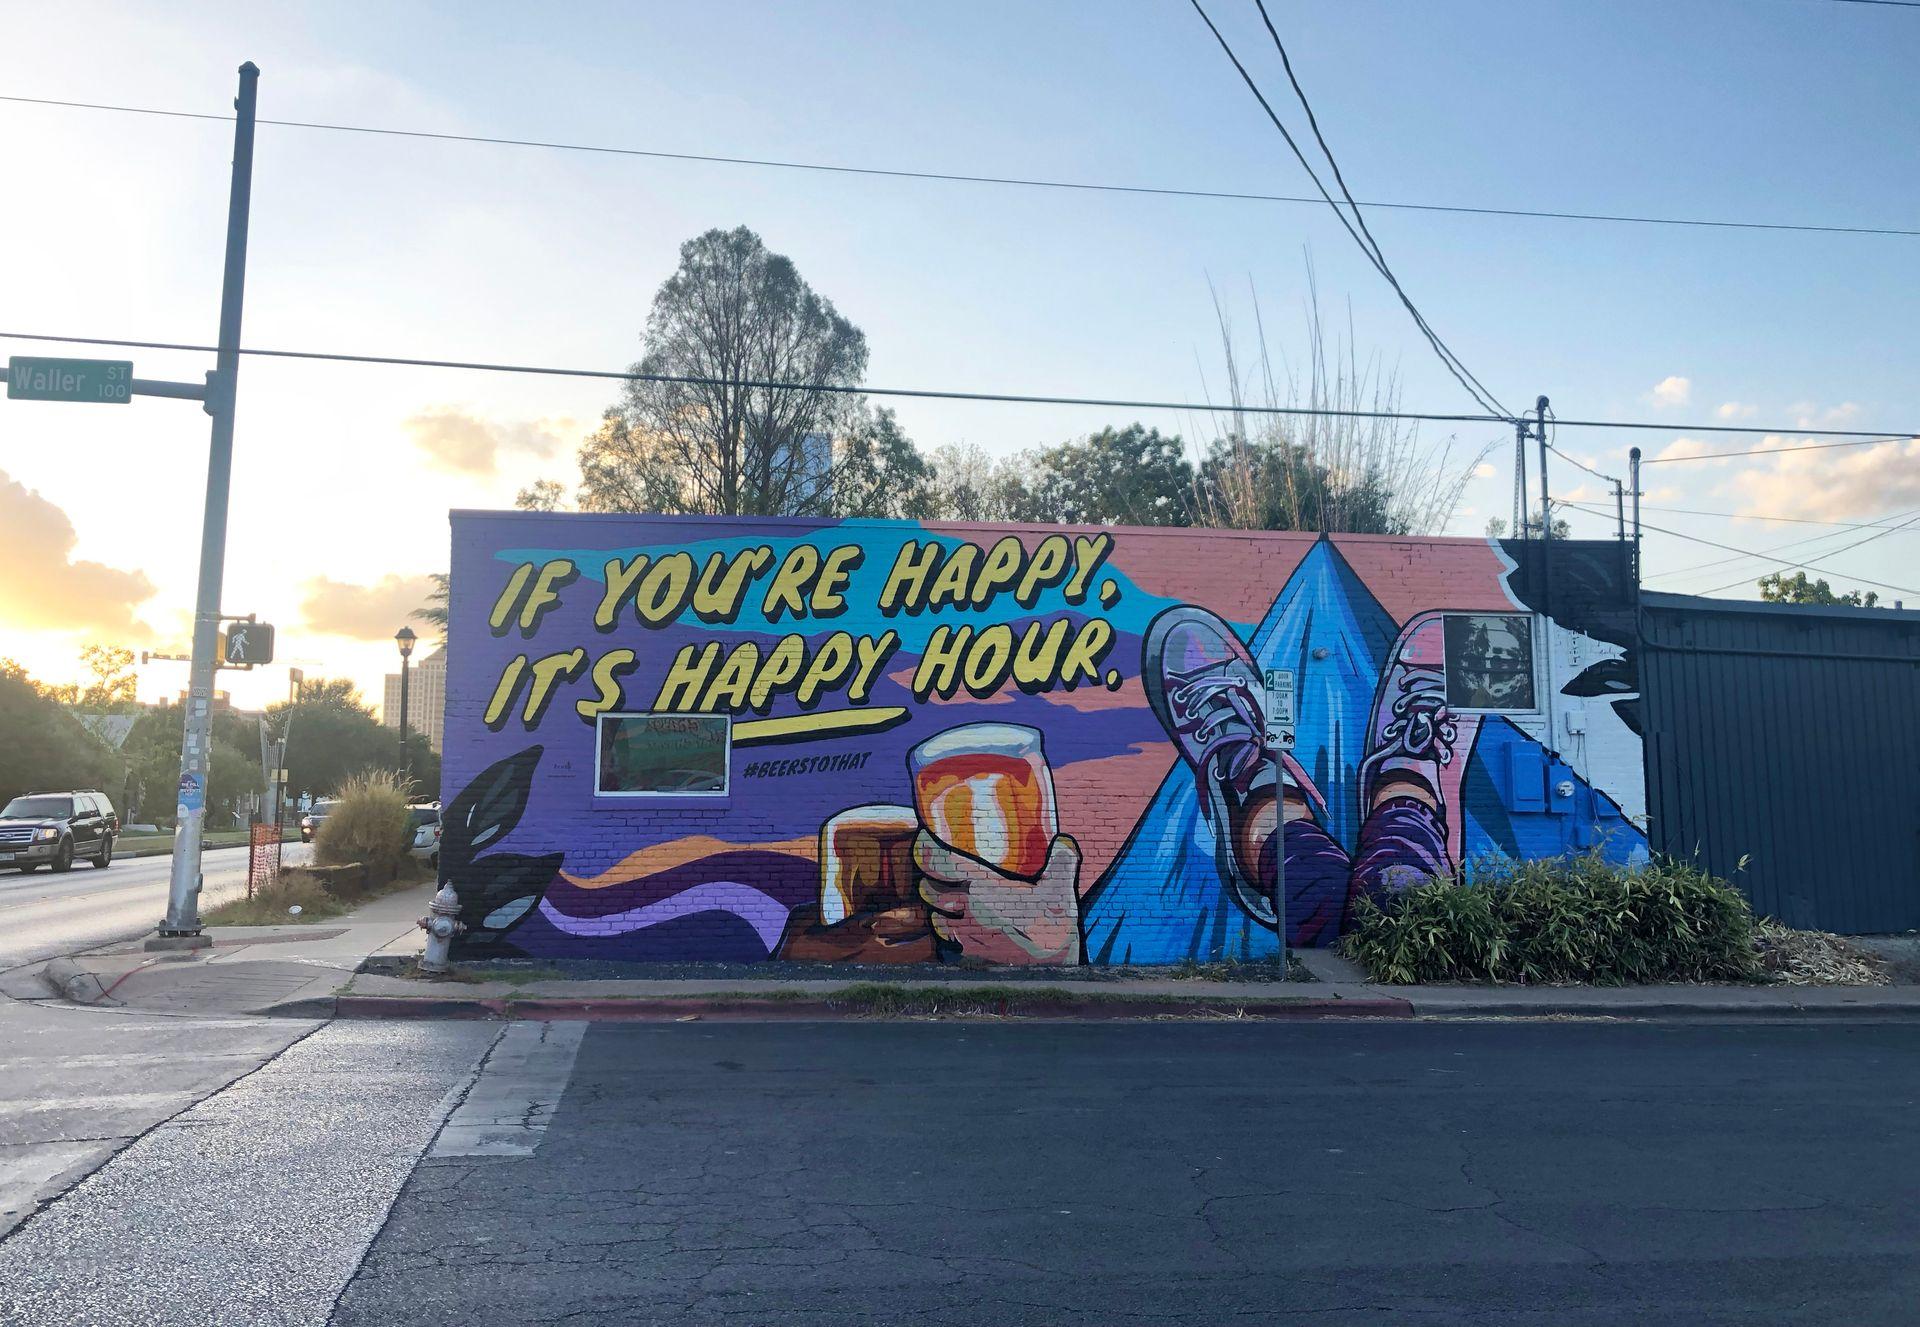 An East Austin mural that reads "If you're happy, it's happy hour"